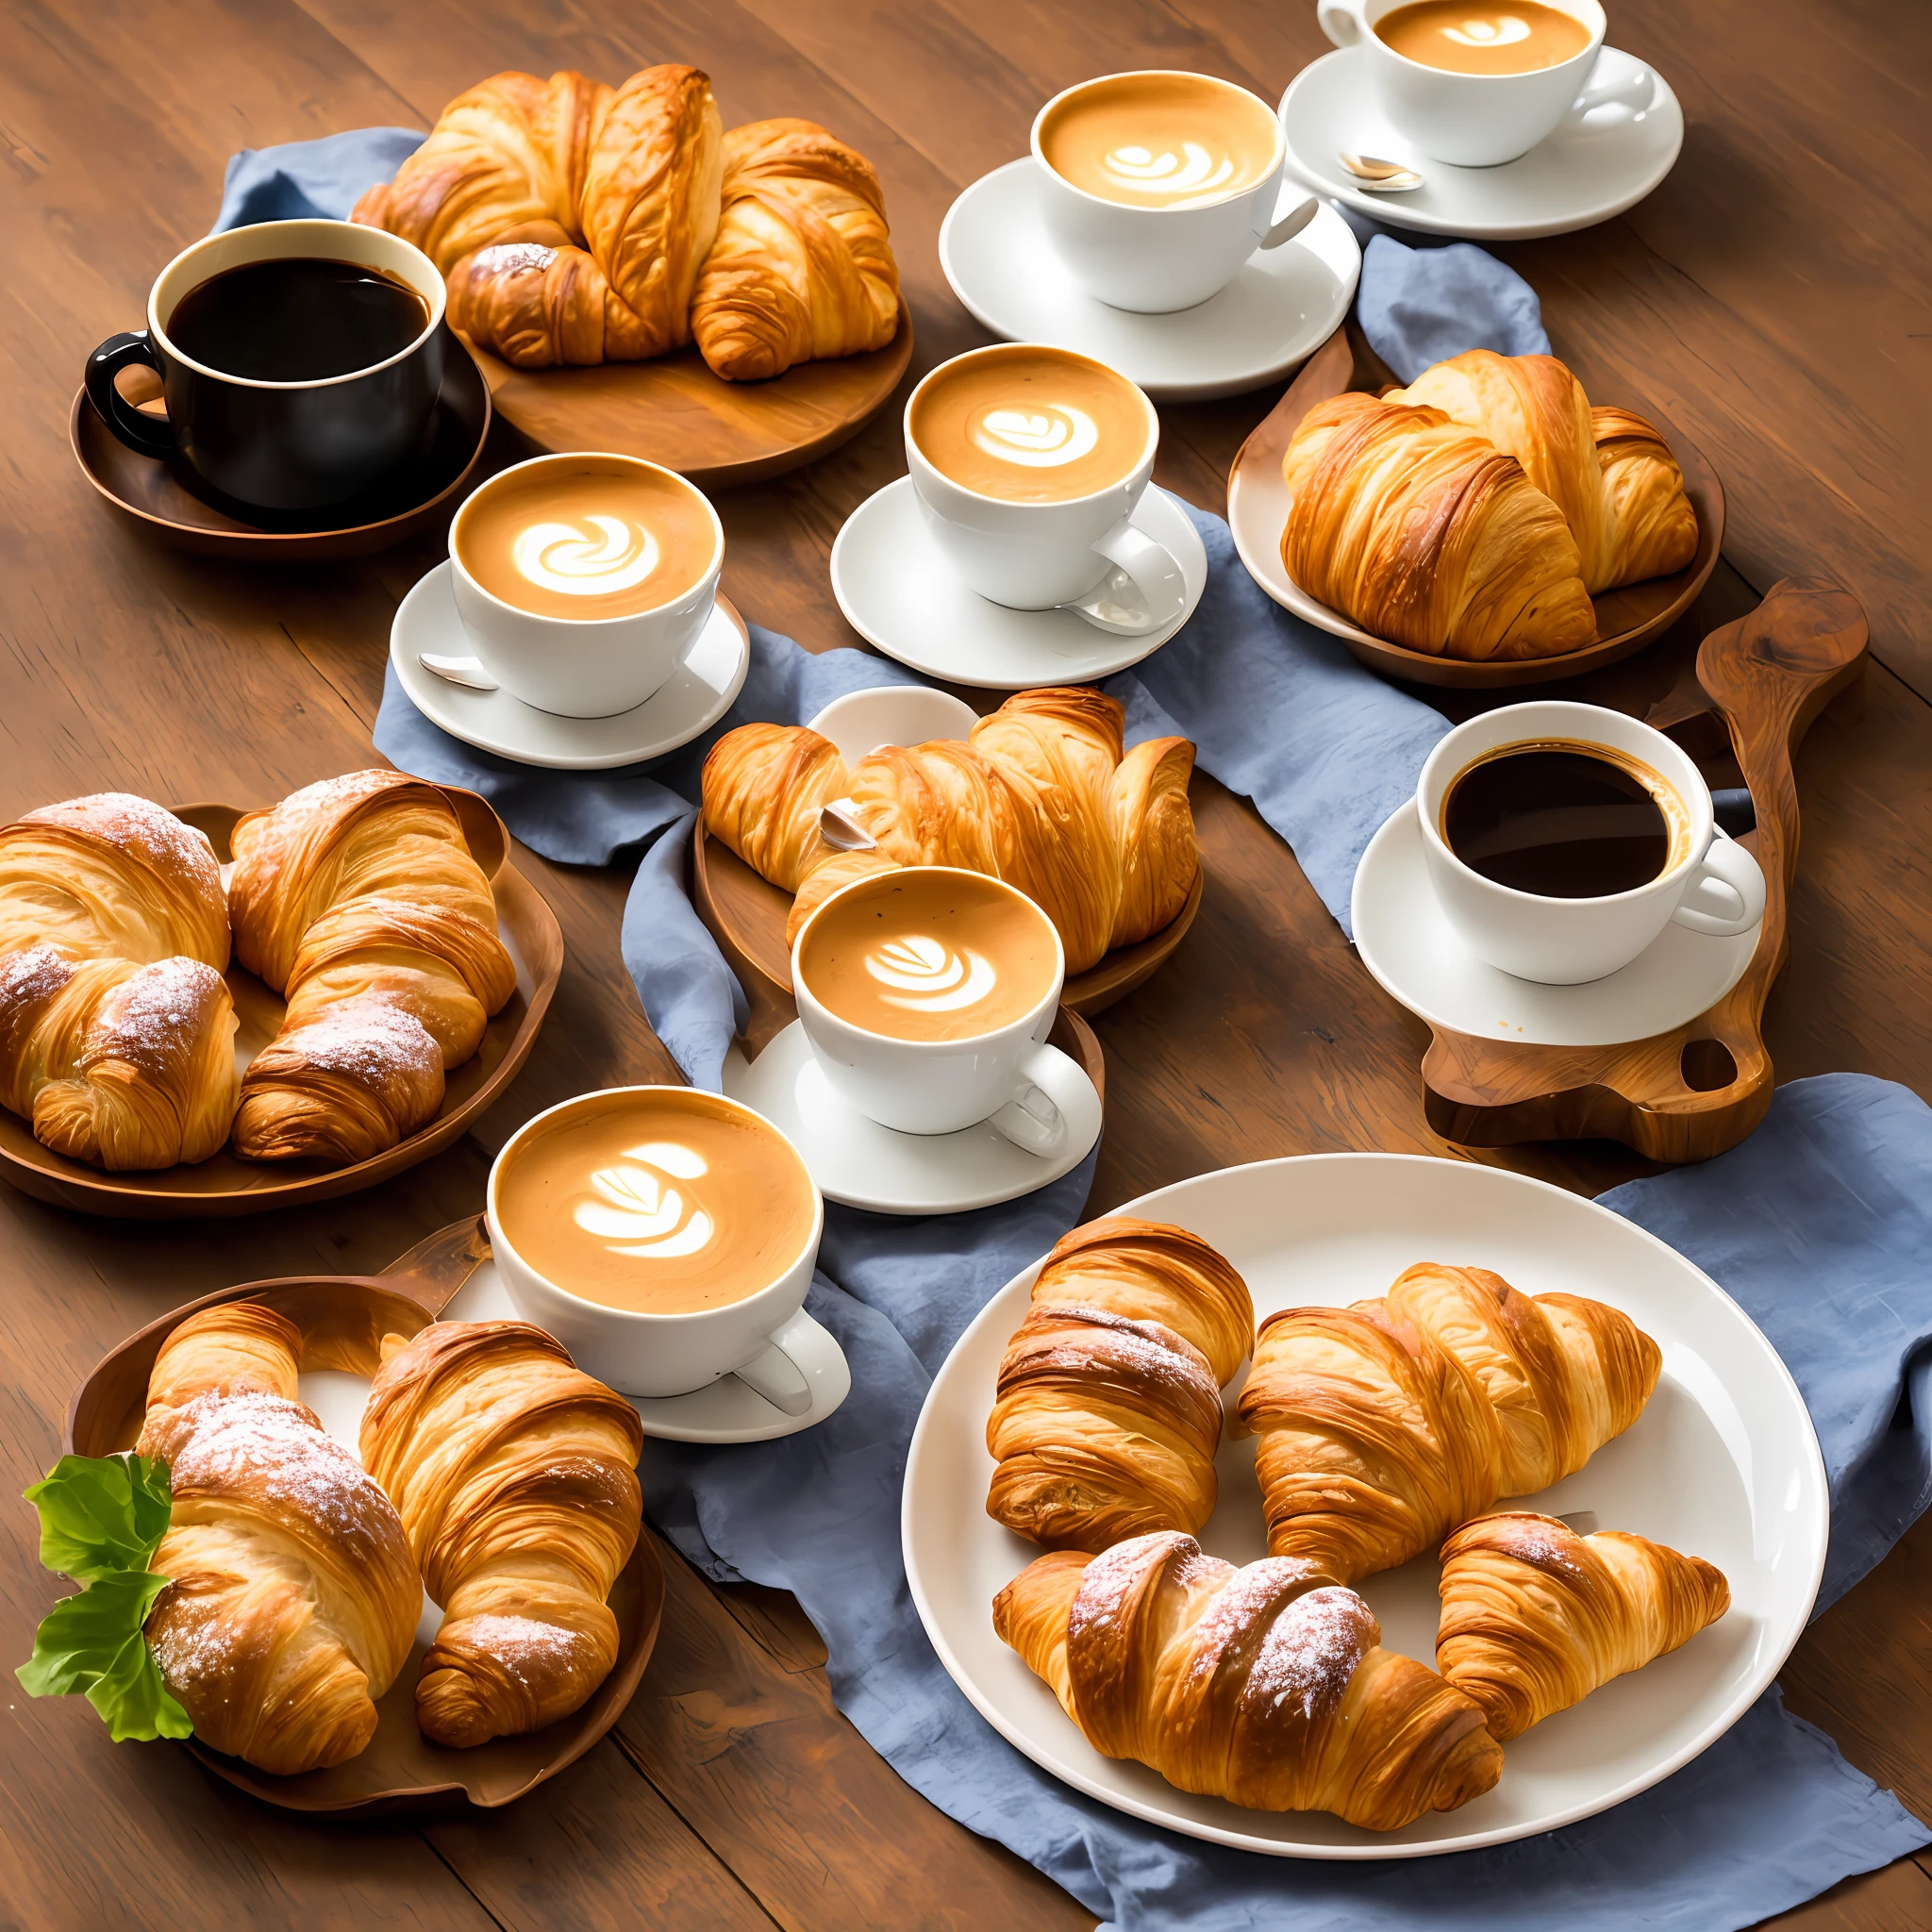 (cozy photo, best quality, warm and soft lighting), ((small tray with freshly baked breads and a fresh croissant, a cup of smoked coffee)) (small fruits), (small details of charm, flowers of the field, warm sun, soft shade, dawn of the day), individual table, juice